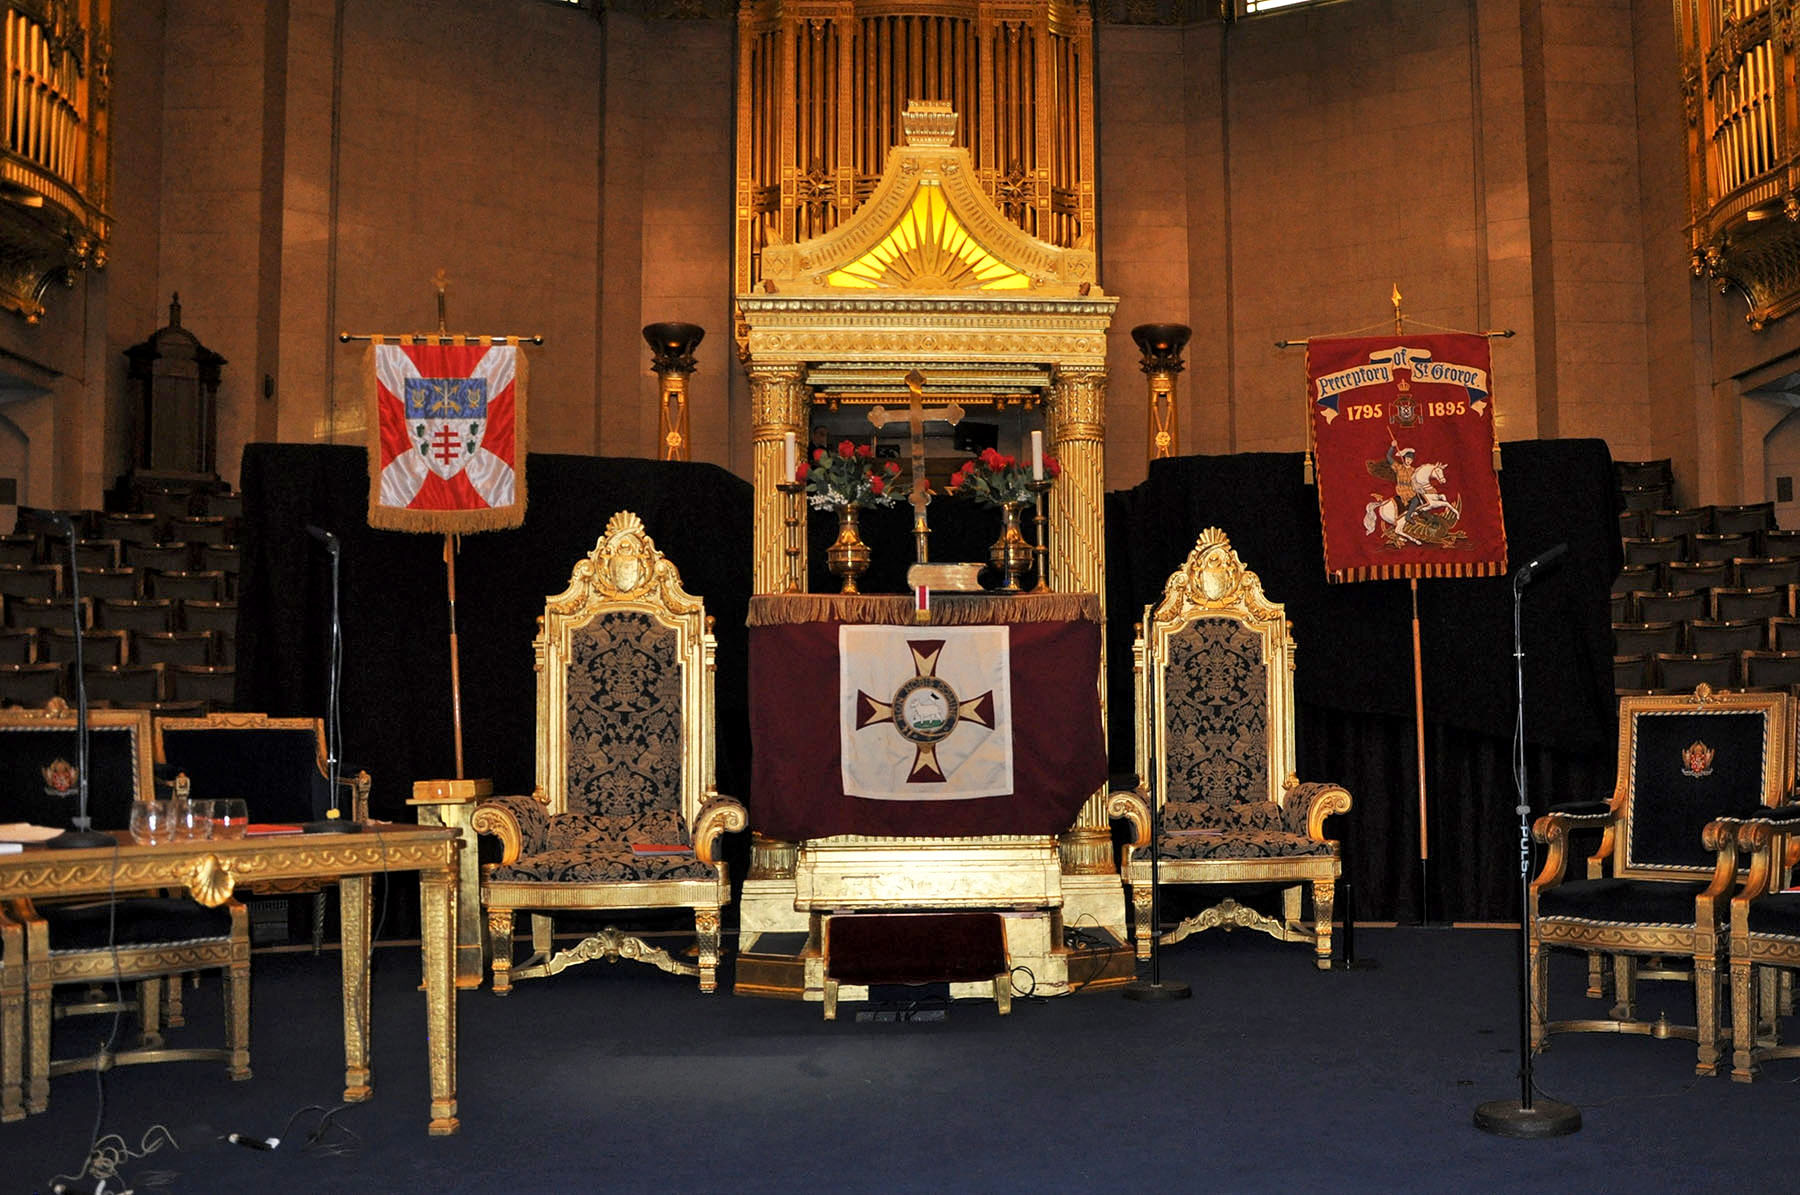 Knights Templar Annual Chapter of Great Priory